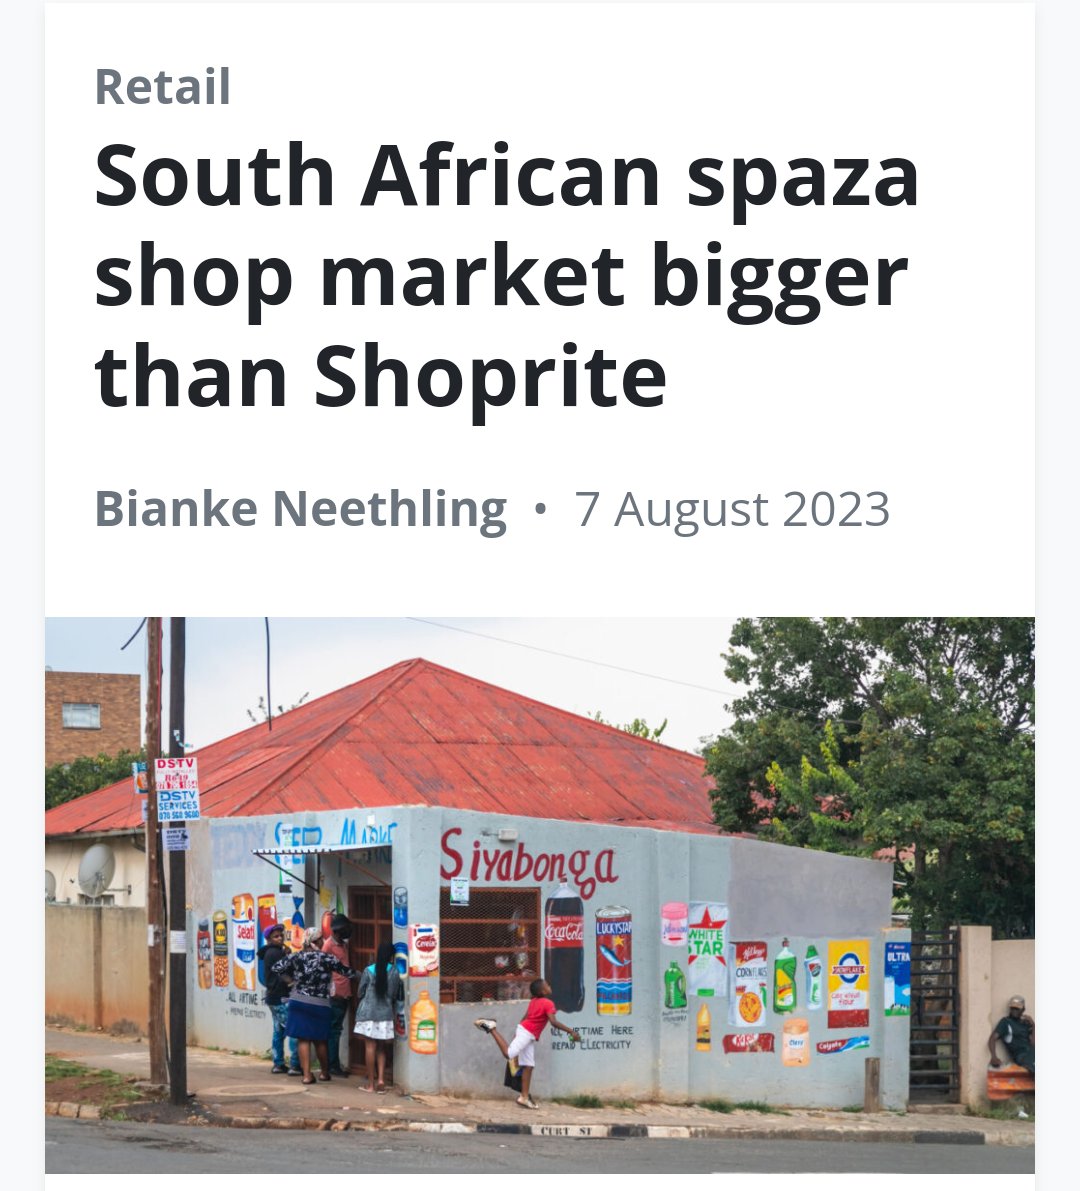 No wonder the anti-SA citizens cult, EFF, is against ActionSA’s #Spaza4Locals initiative. Remember, Shoprite is the biggest retailer in Africa. Imagine the economic impact of SA citizens owning their spaza shops back